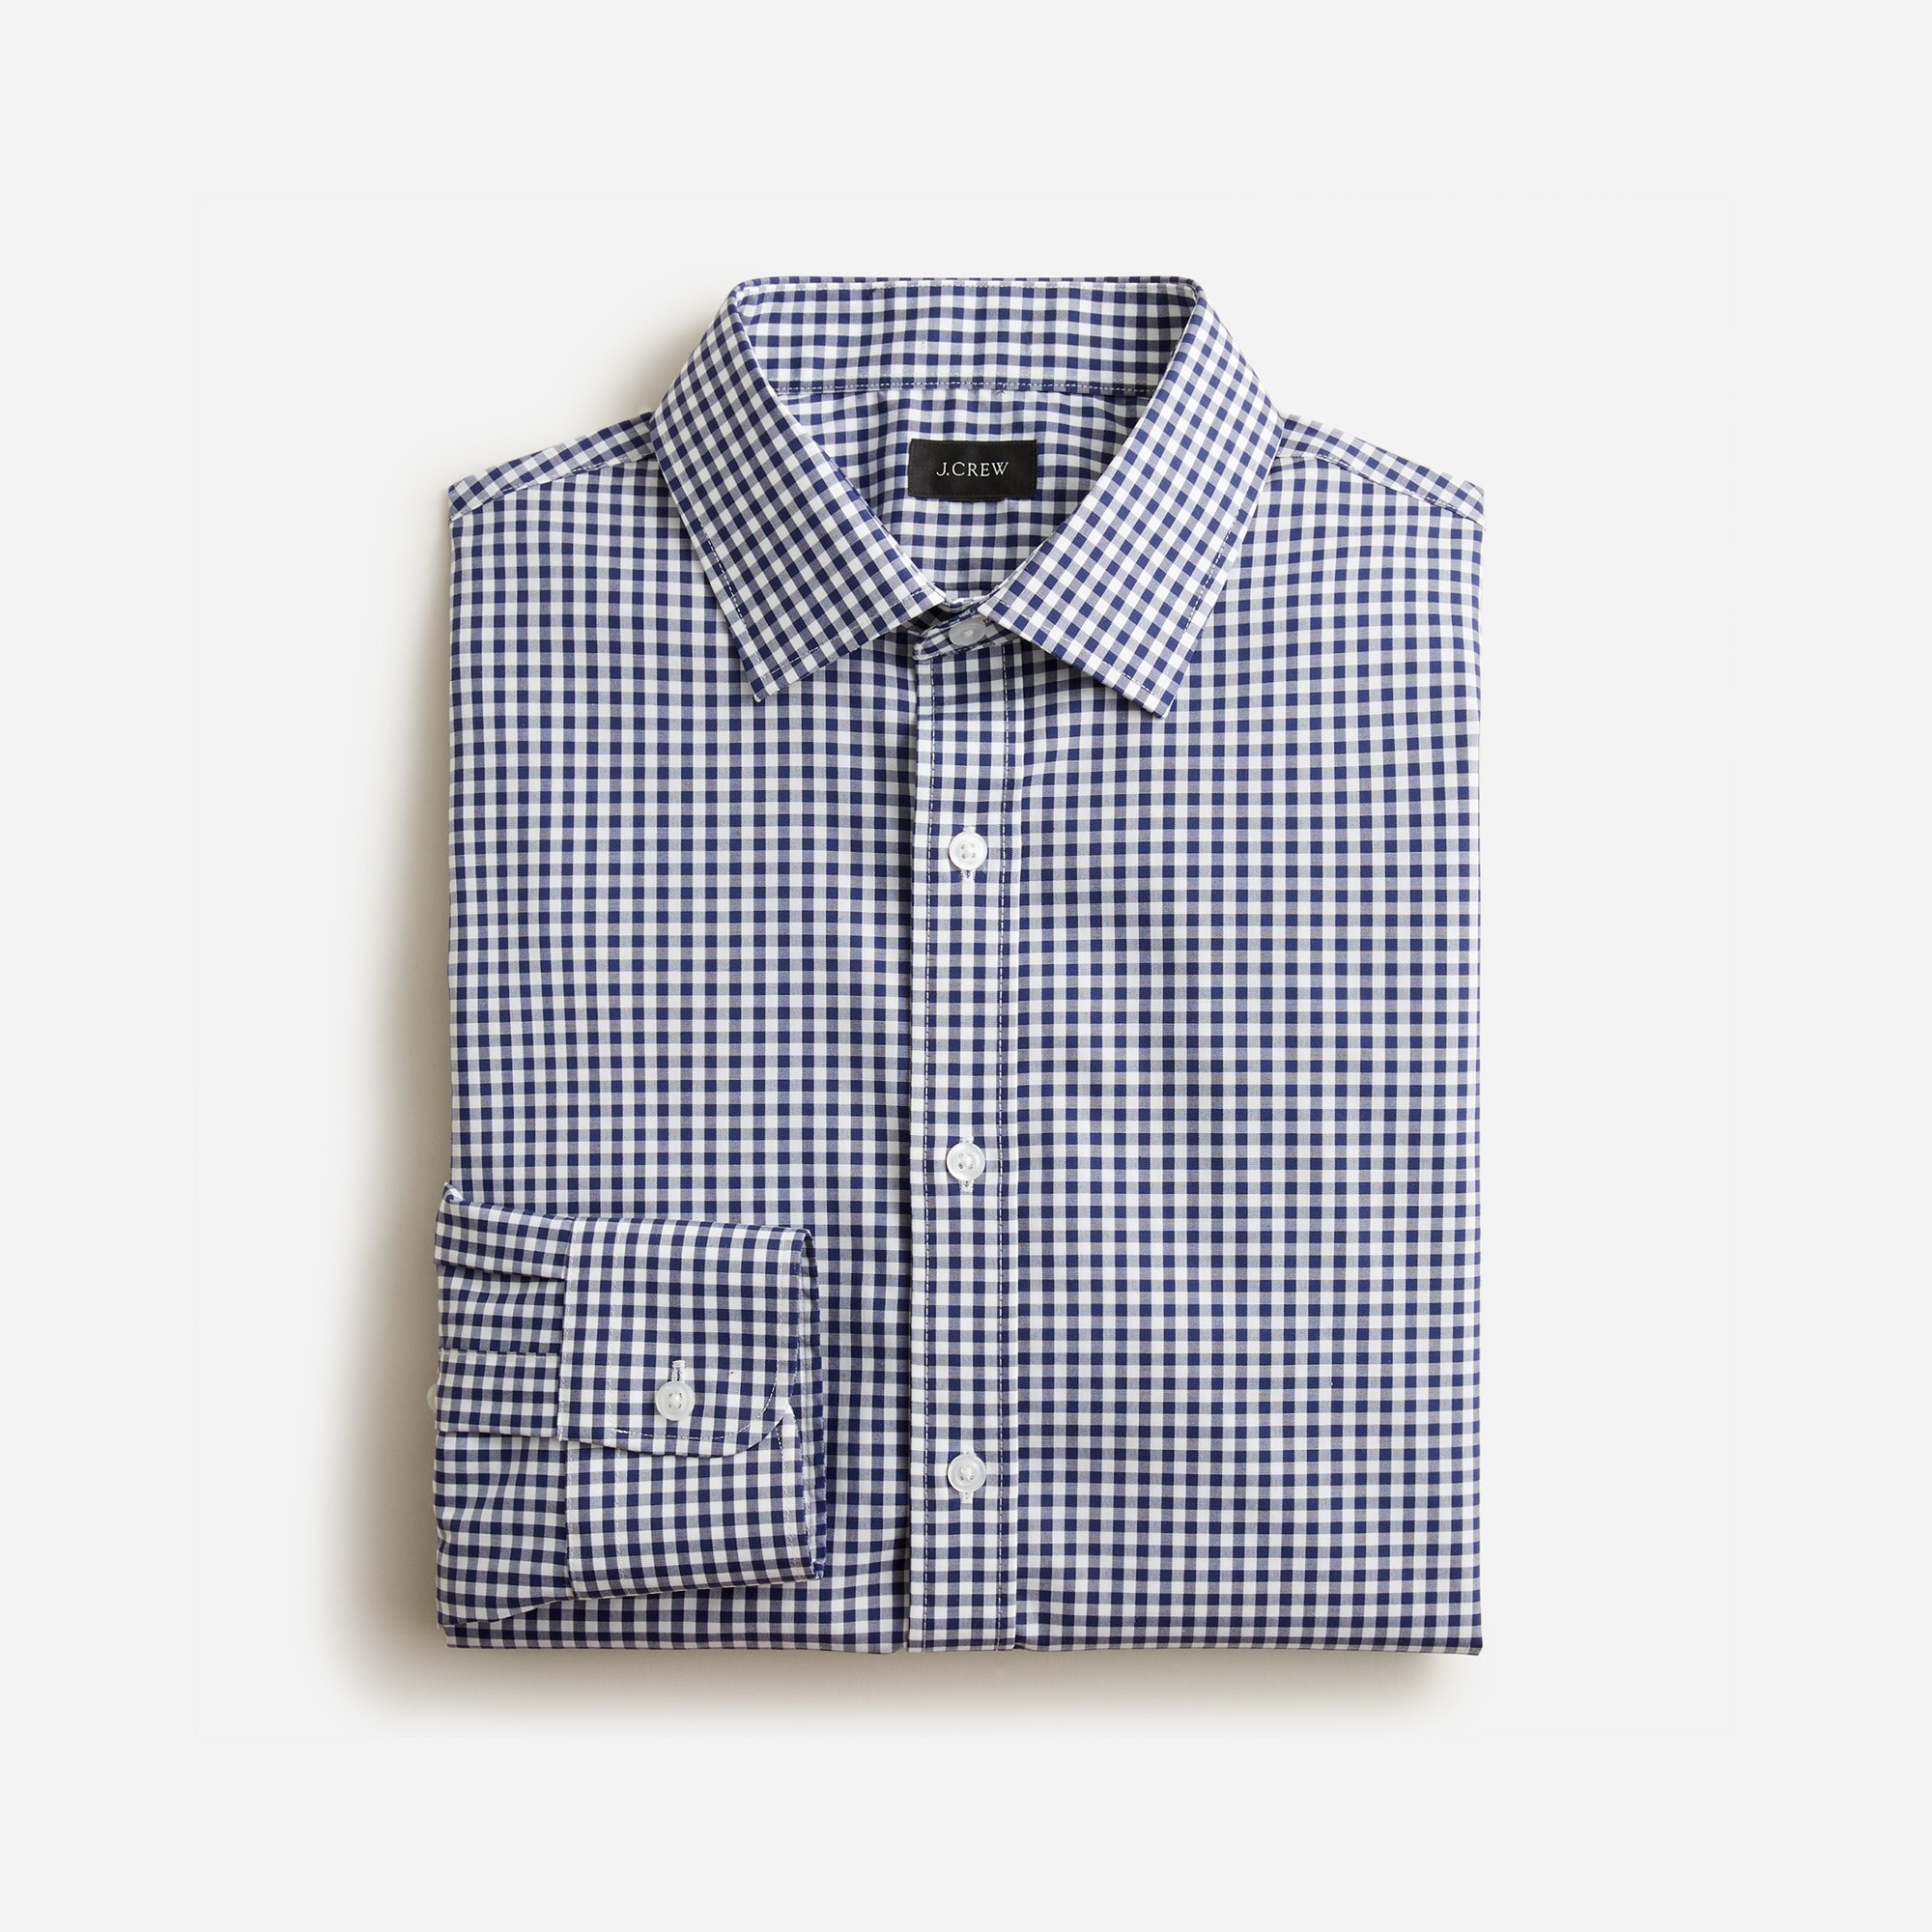 mens Slim-fit Bowery wrinkle-free stretch cotton shirt with spread collar